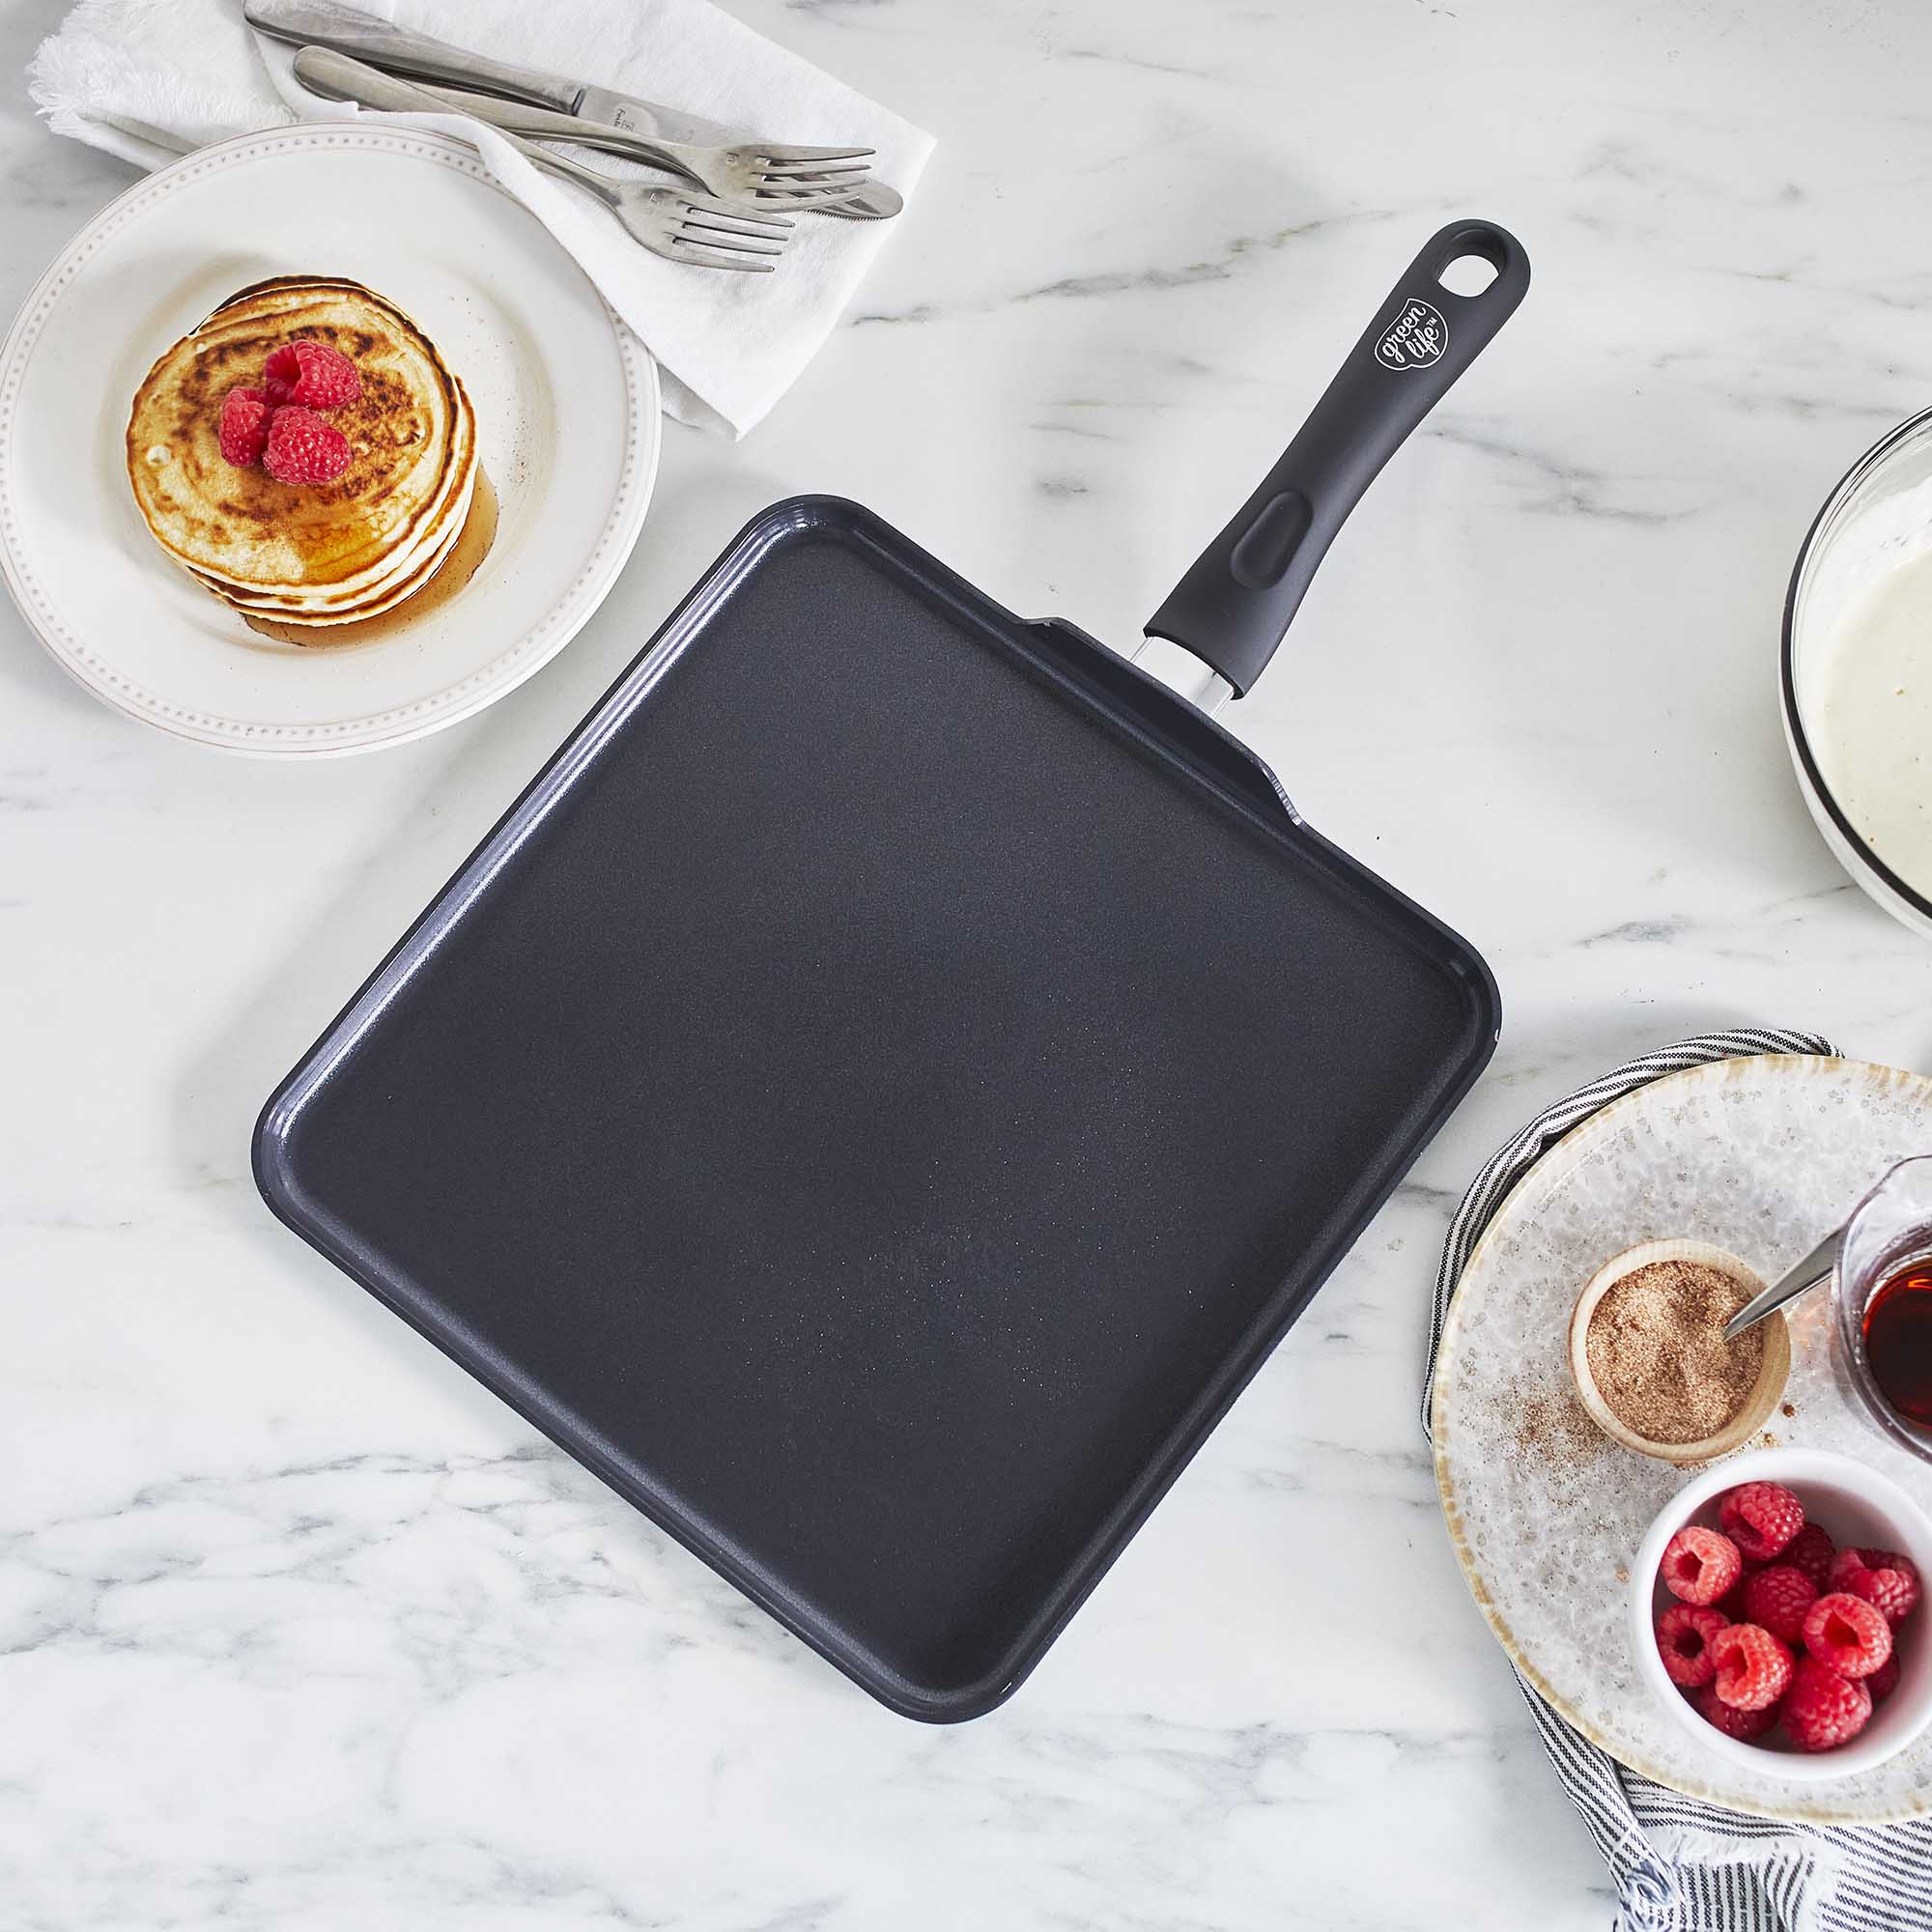 Greater Goods Cast Iron Griddle - Cook Like a Pro with Smooth